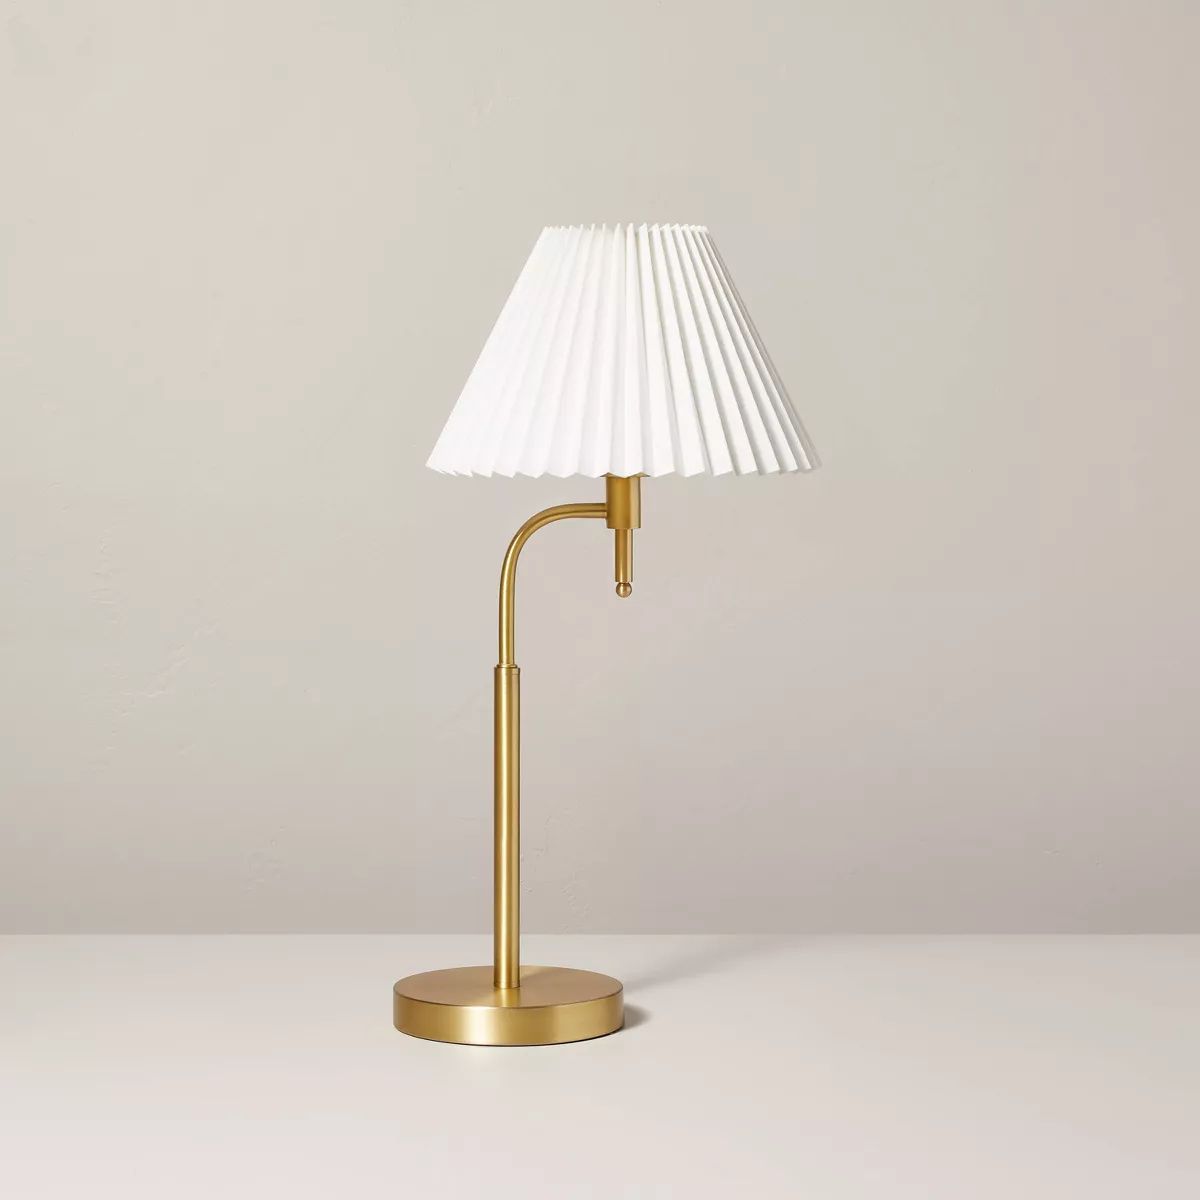 22" Pleated Shade Metal Arch Table Lamp Brass/Cream - Hearth & Hand™ with Magnolia | Target